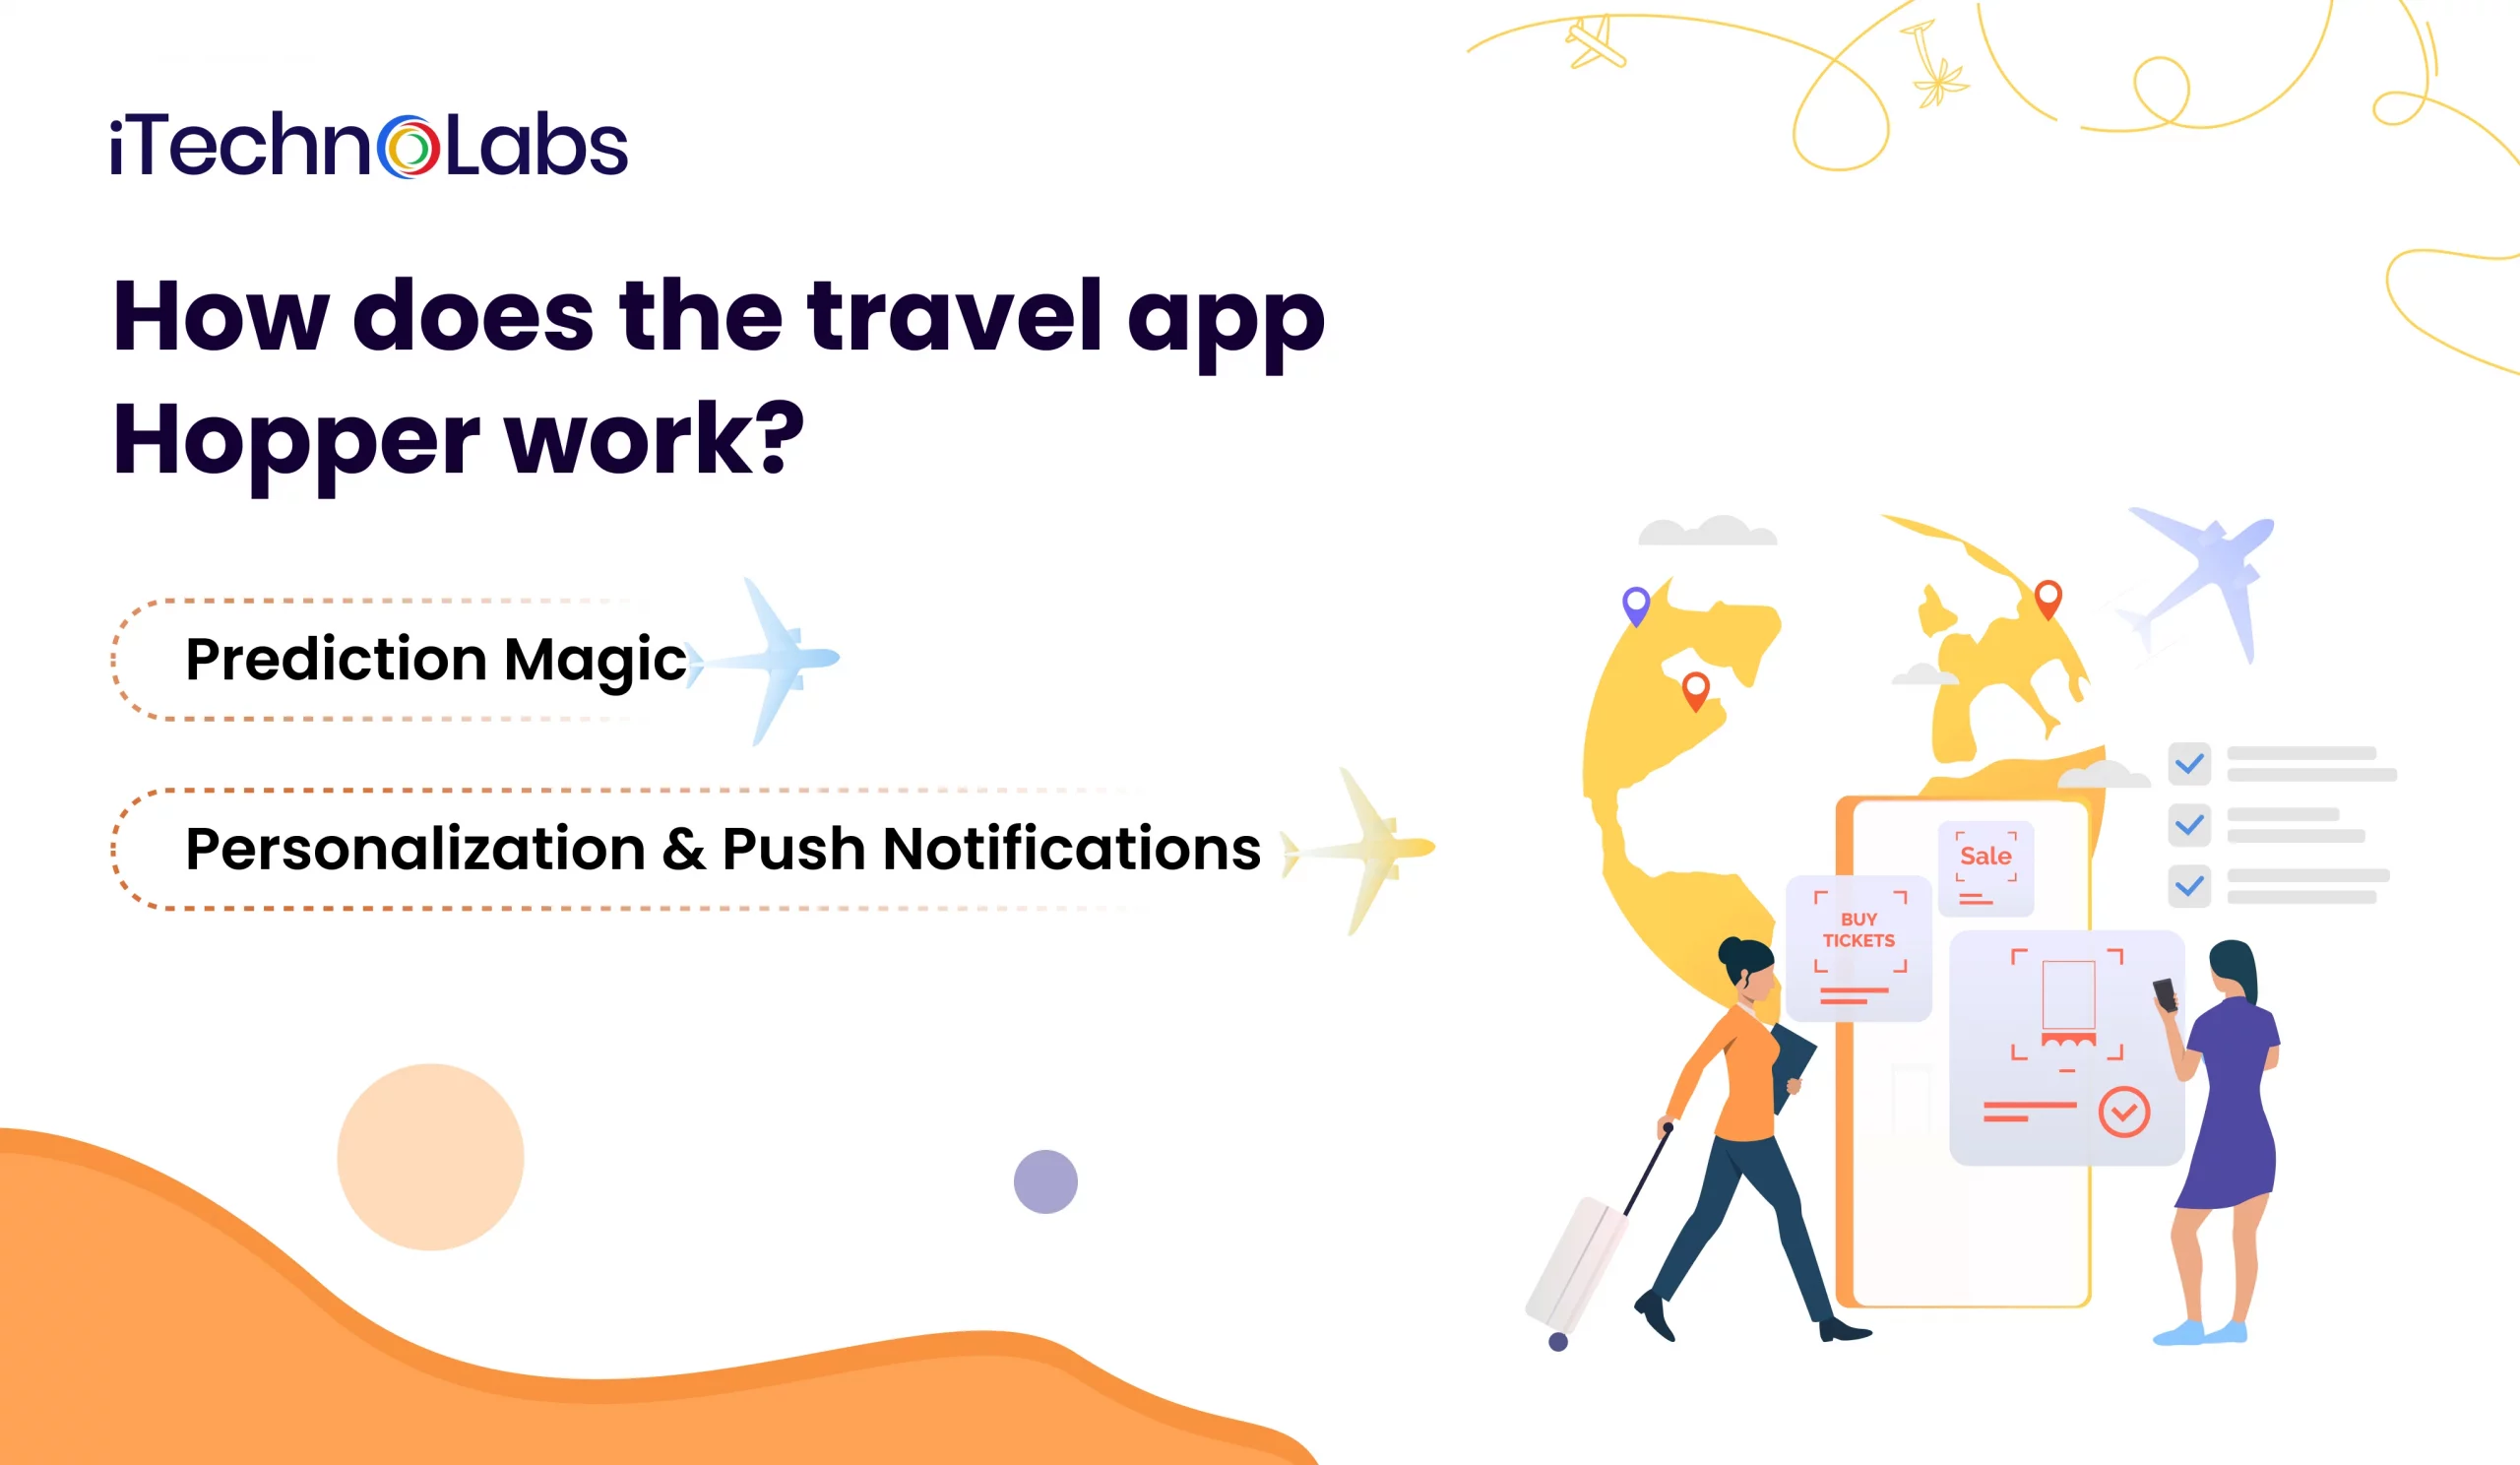 iTechnolabs-How does the travel app Hopper work?